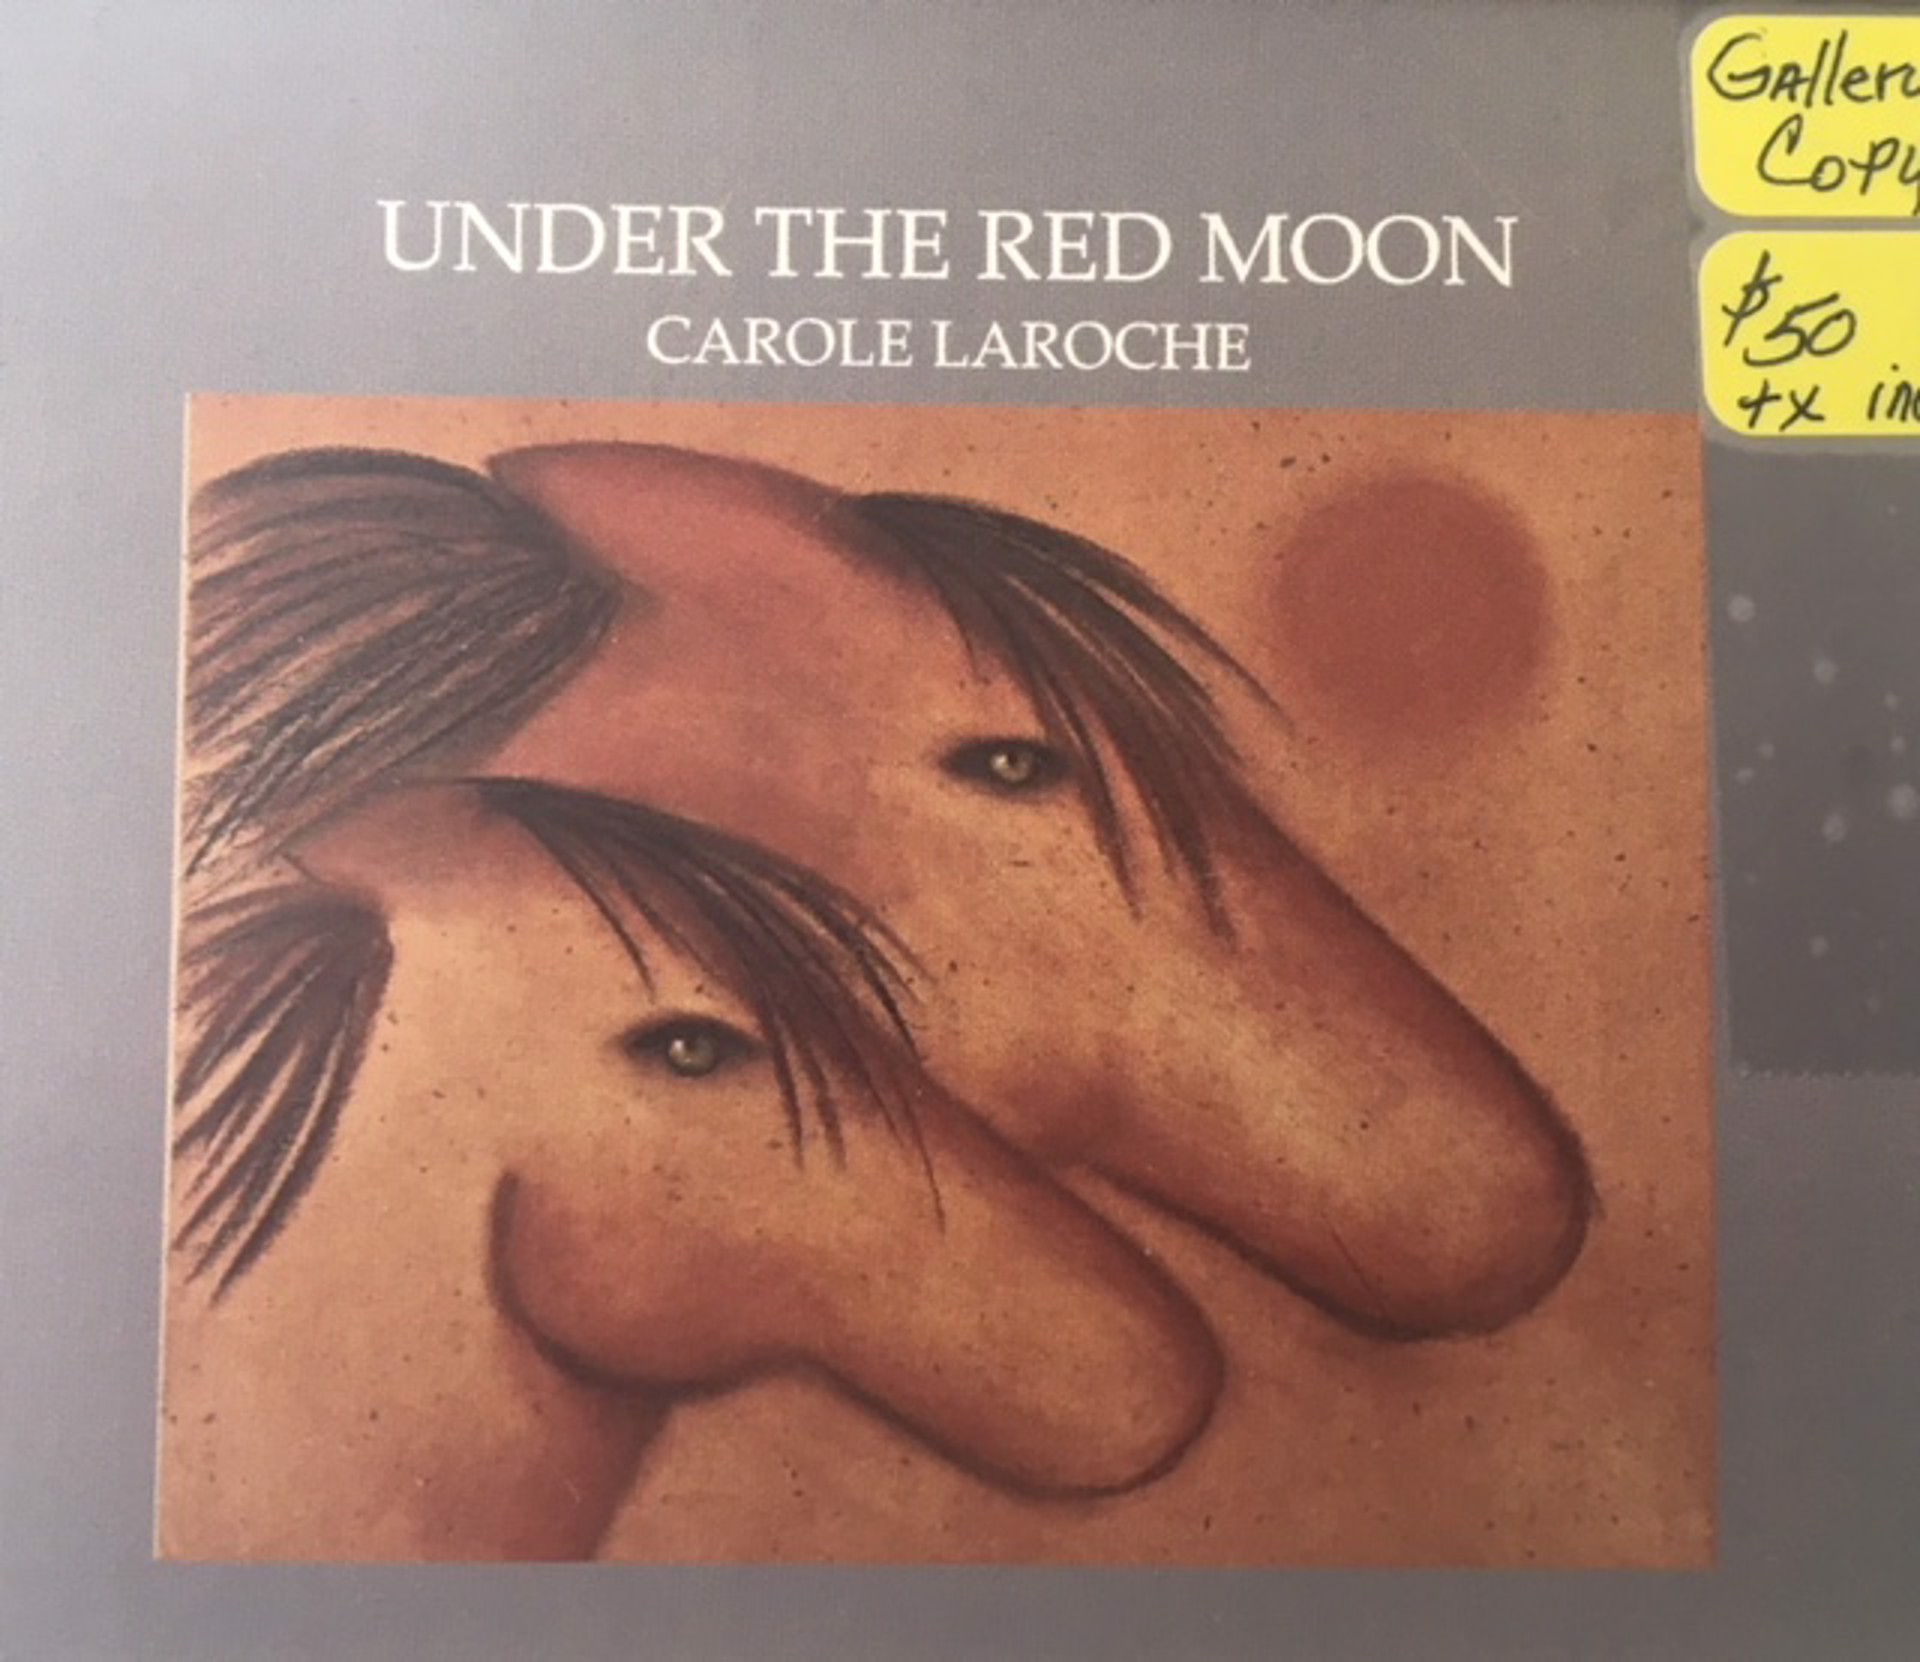 BOOK UNDER THE RED MOON  $50  Cloth by Carole LaRoche